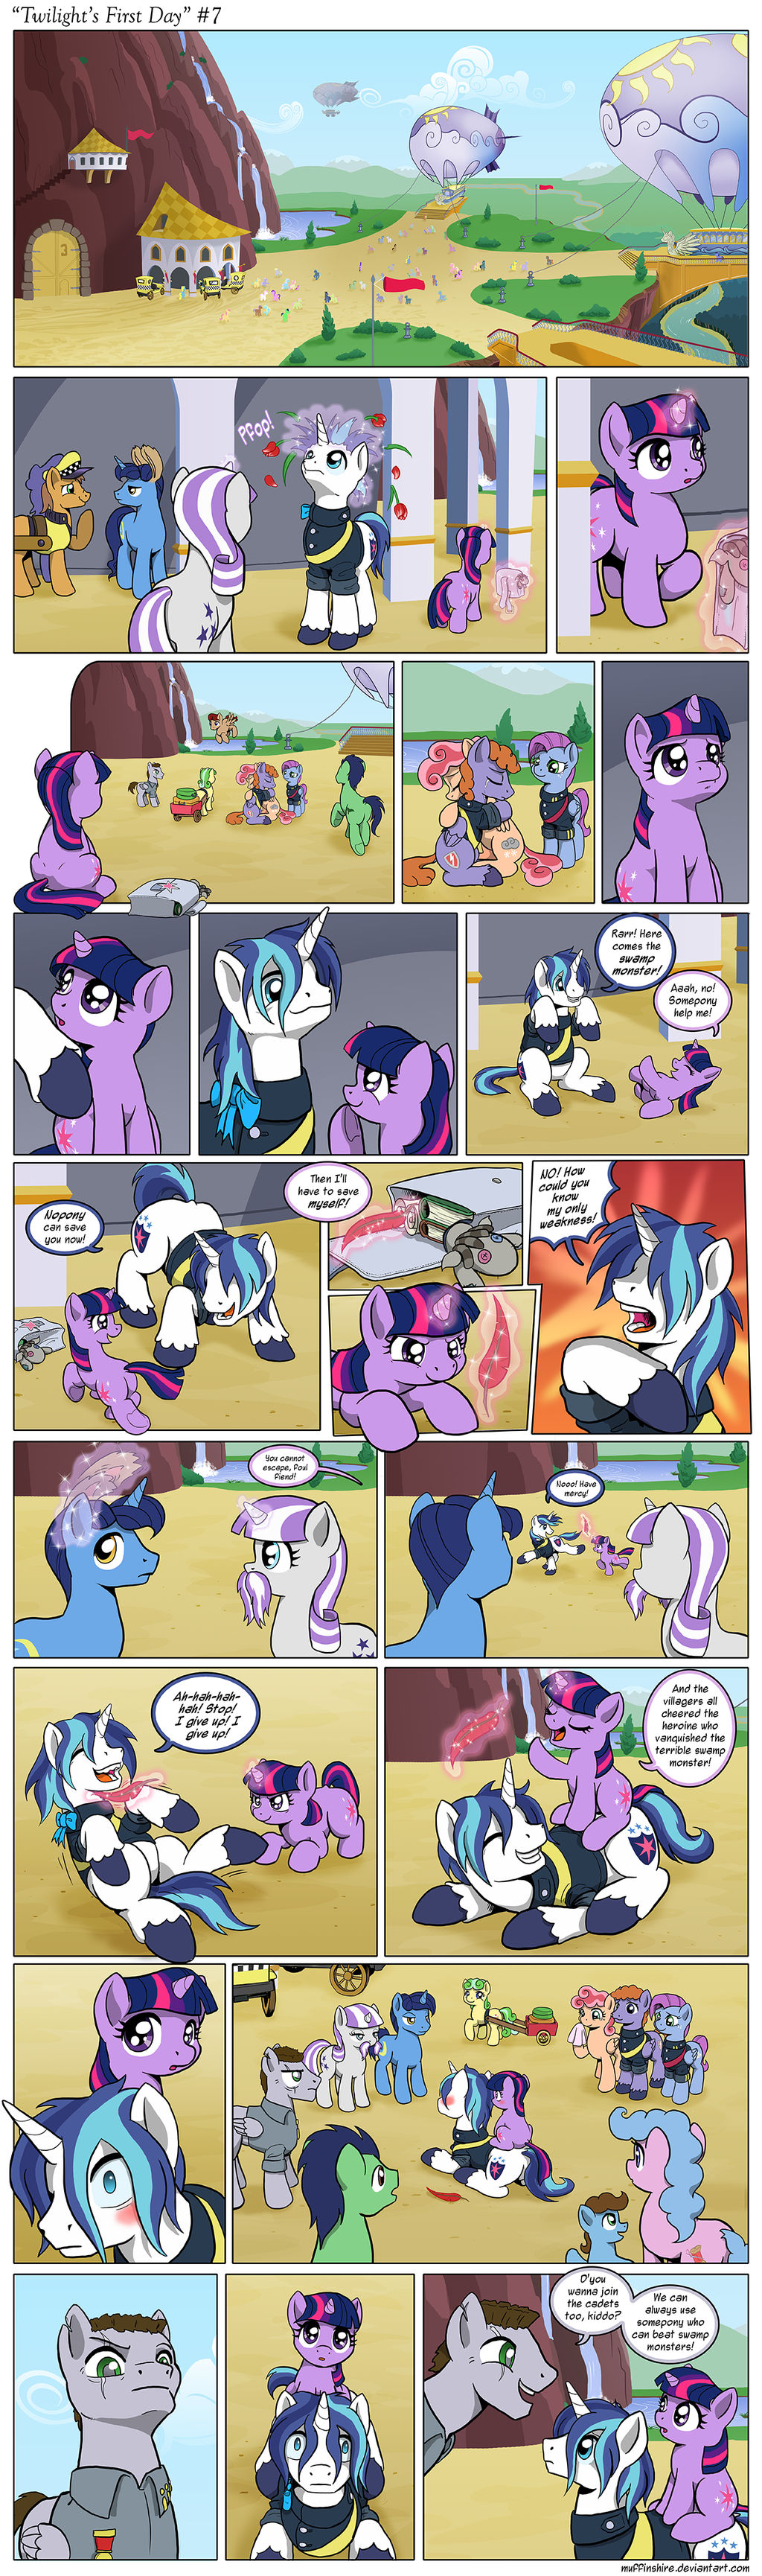 Comic - Twilight's First Day #7